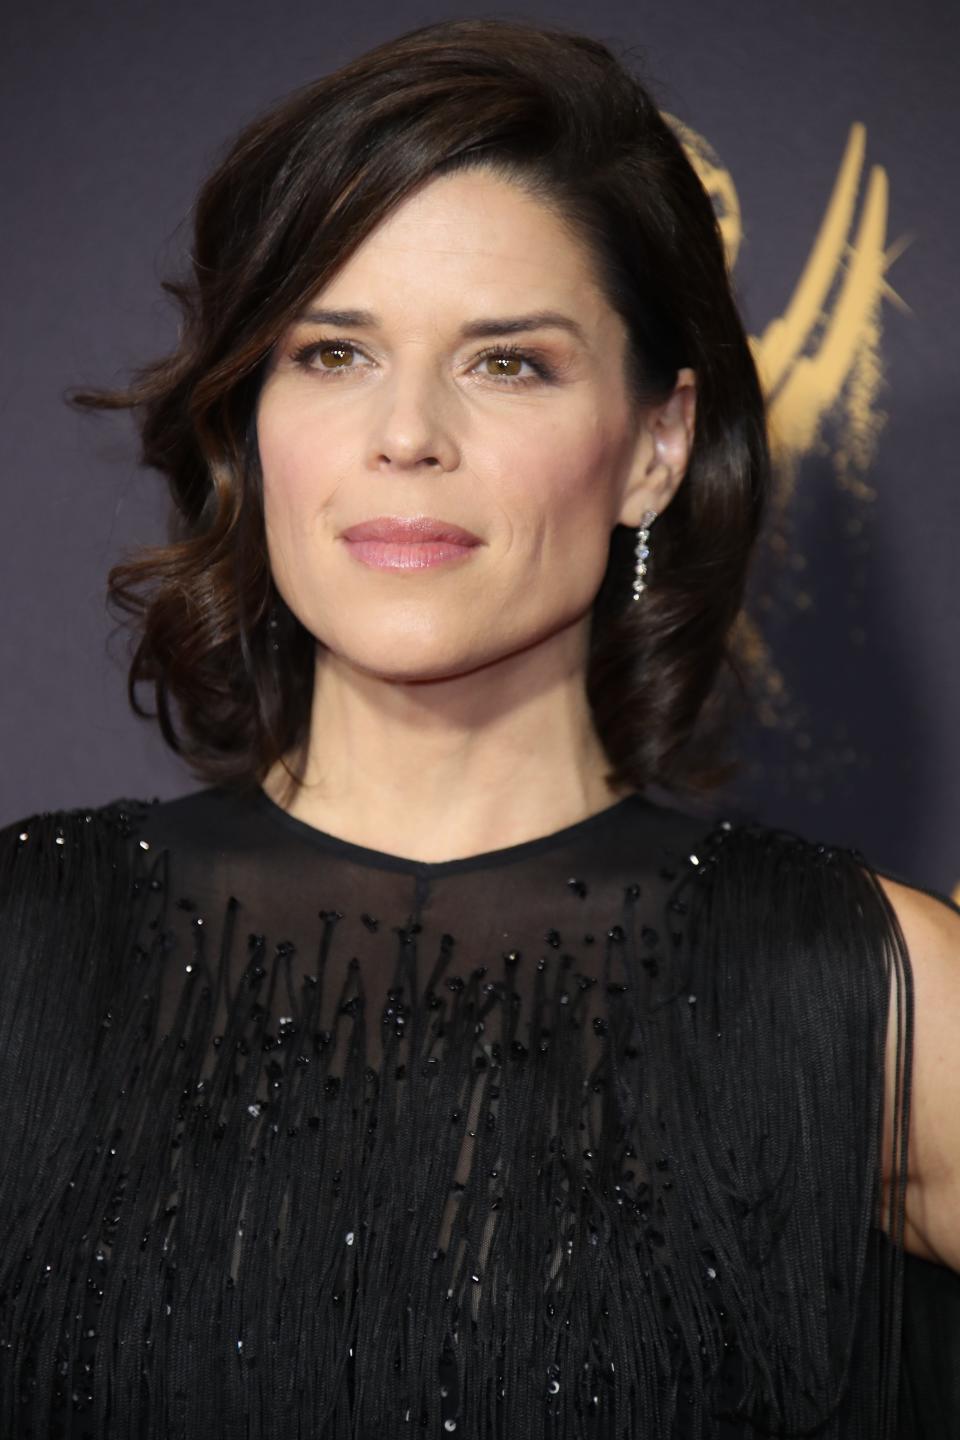 'Scream' actress Neve Campbell is returning to the series for its upcoming seventh film.